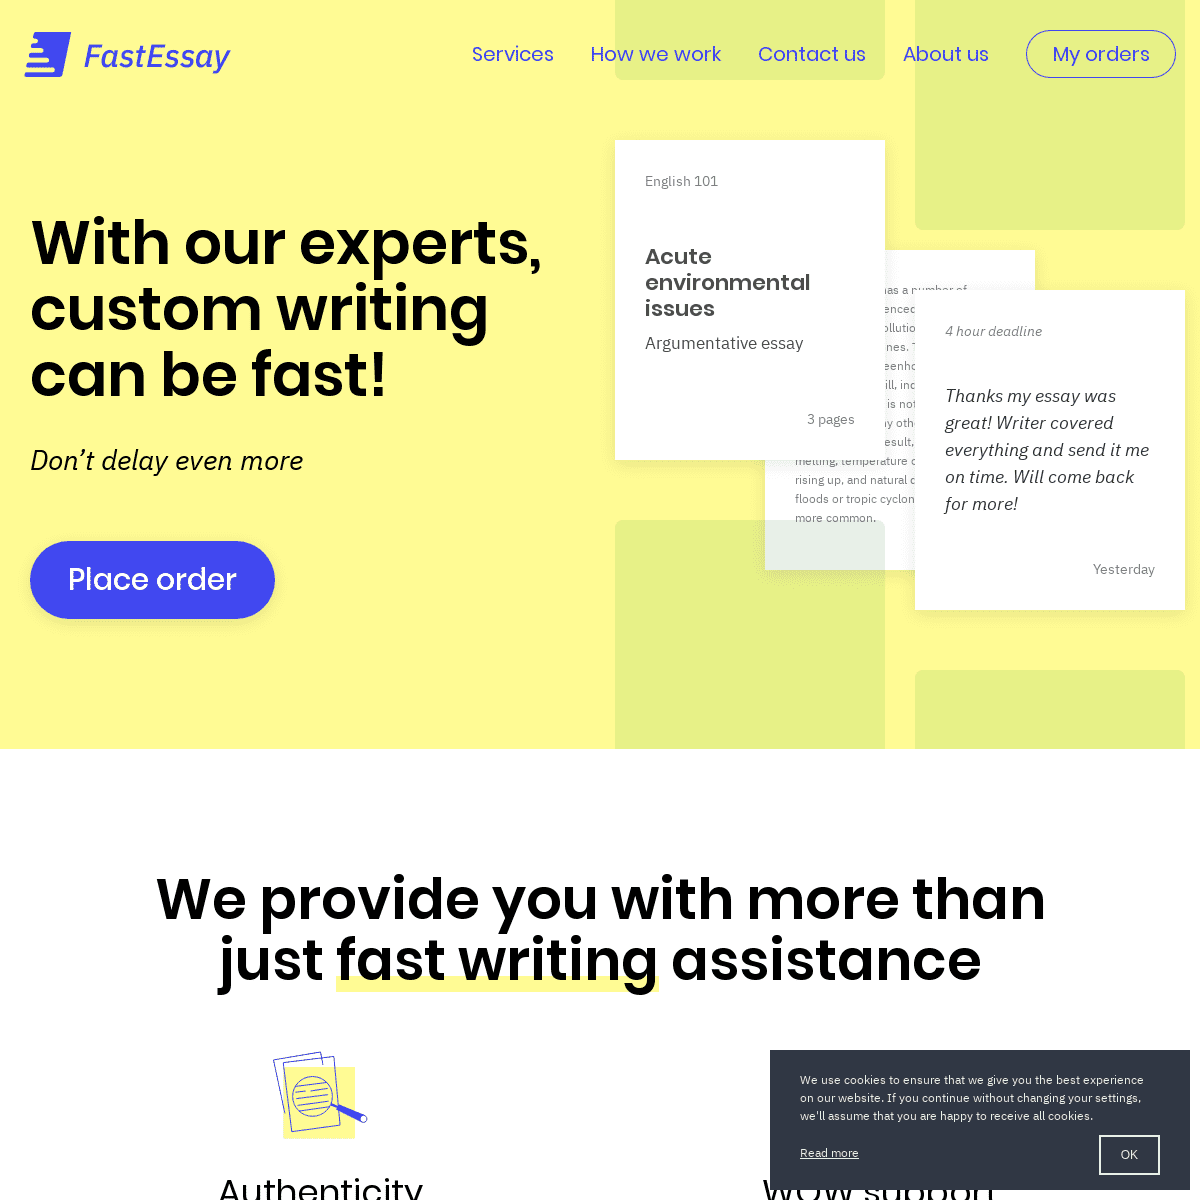 A complete backup of https://fastessay.net